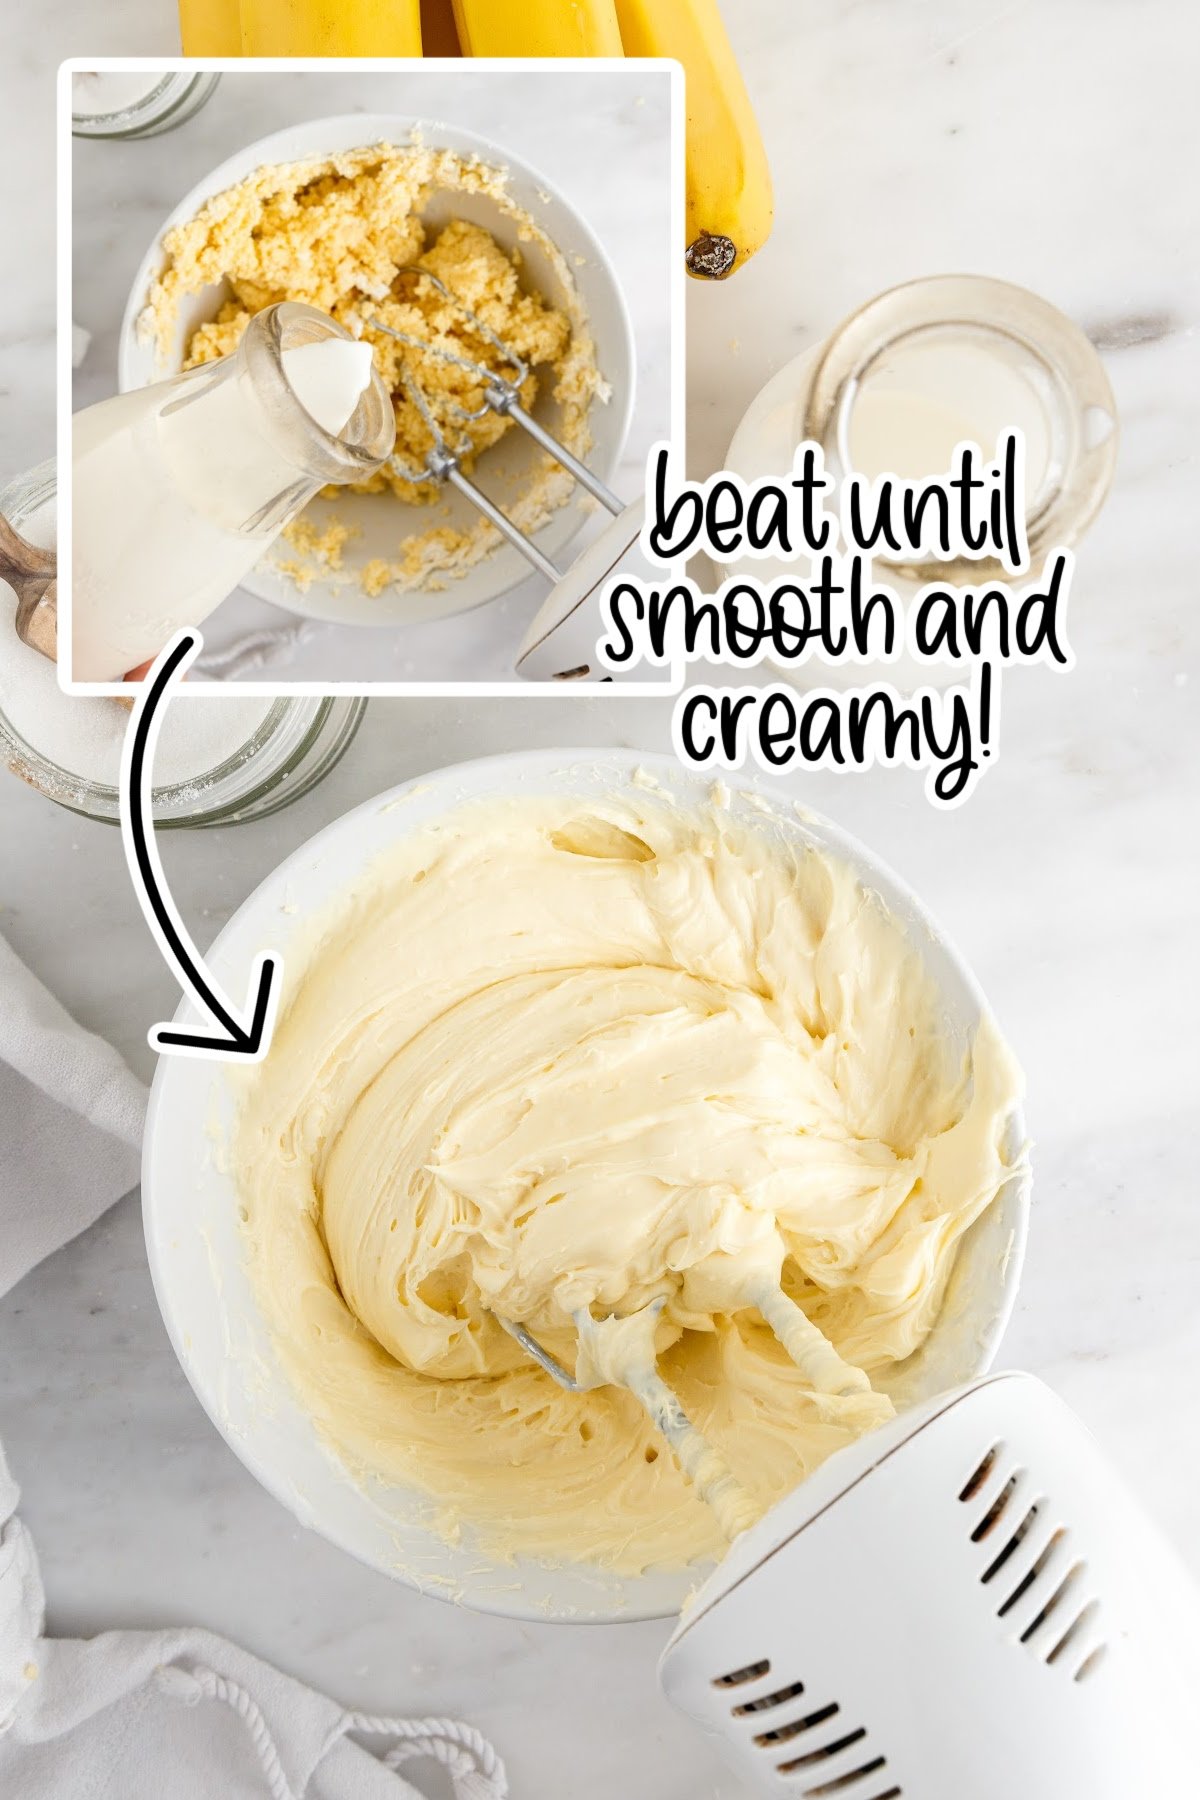 Pouring milk into cheesecake mixture and smooth mixture with beaters in it, text overlay "beat until smooth and creamy."